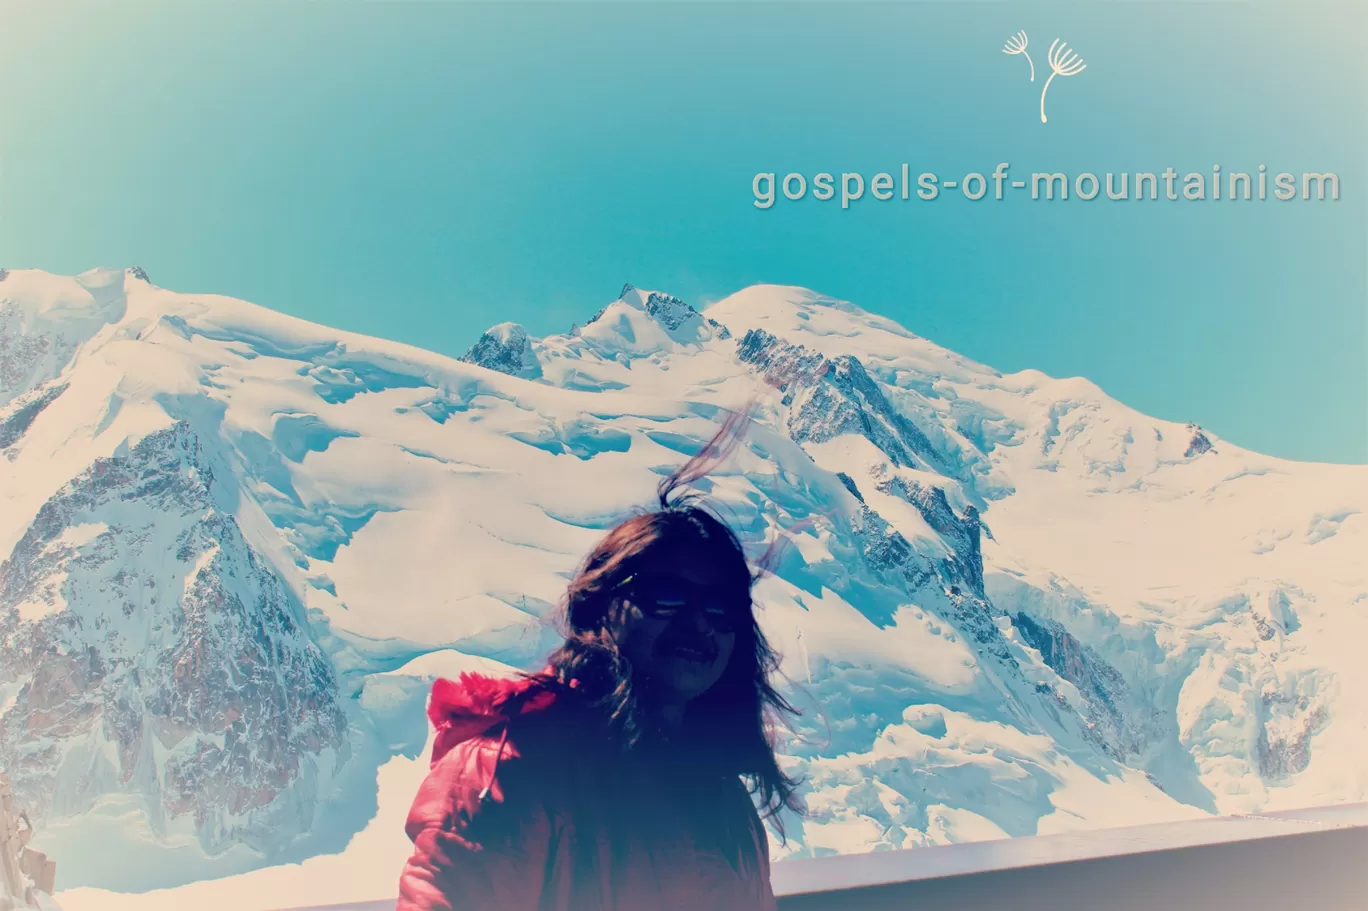 Photo of Mont Blanc By gospels-of-mountainism